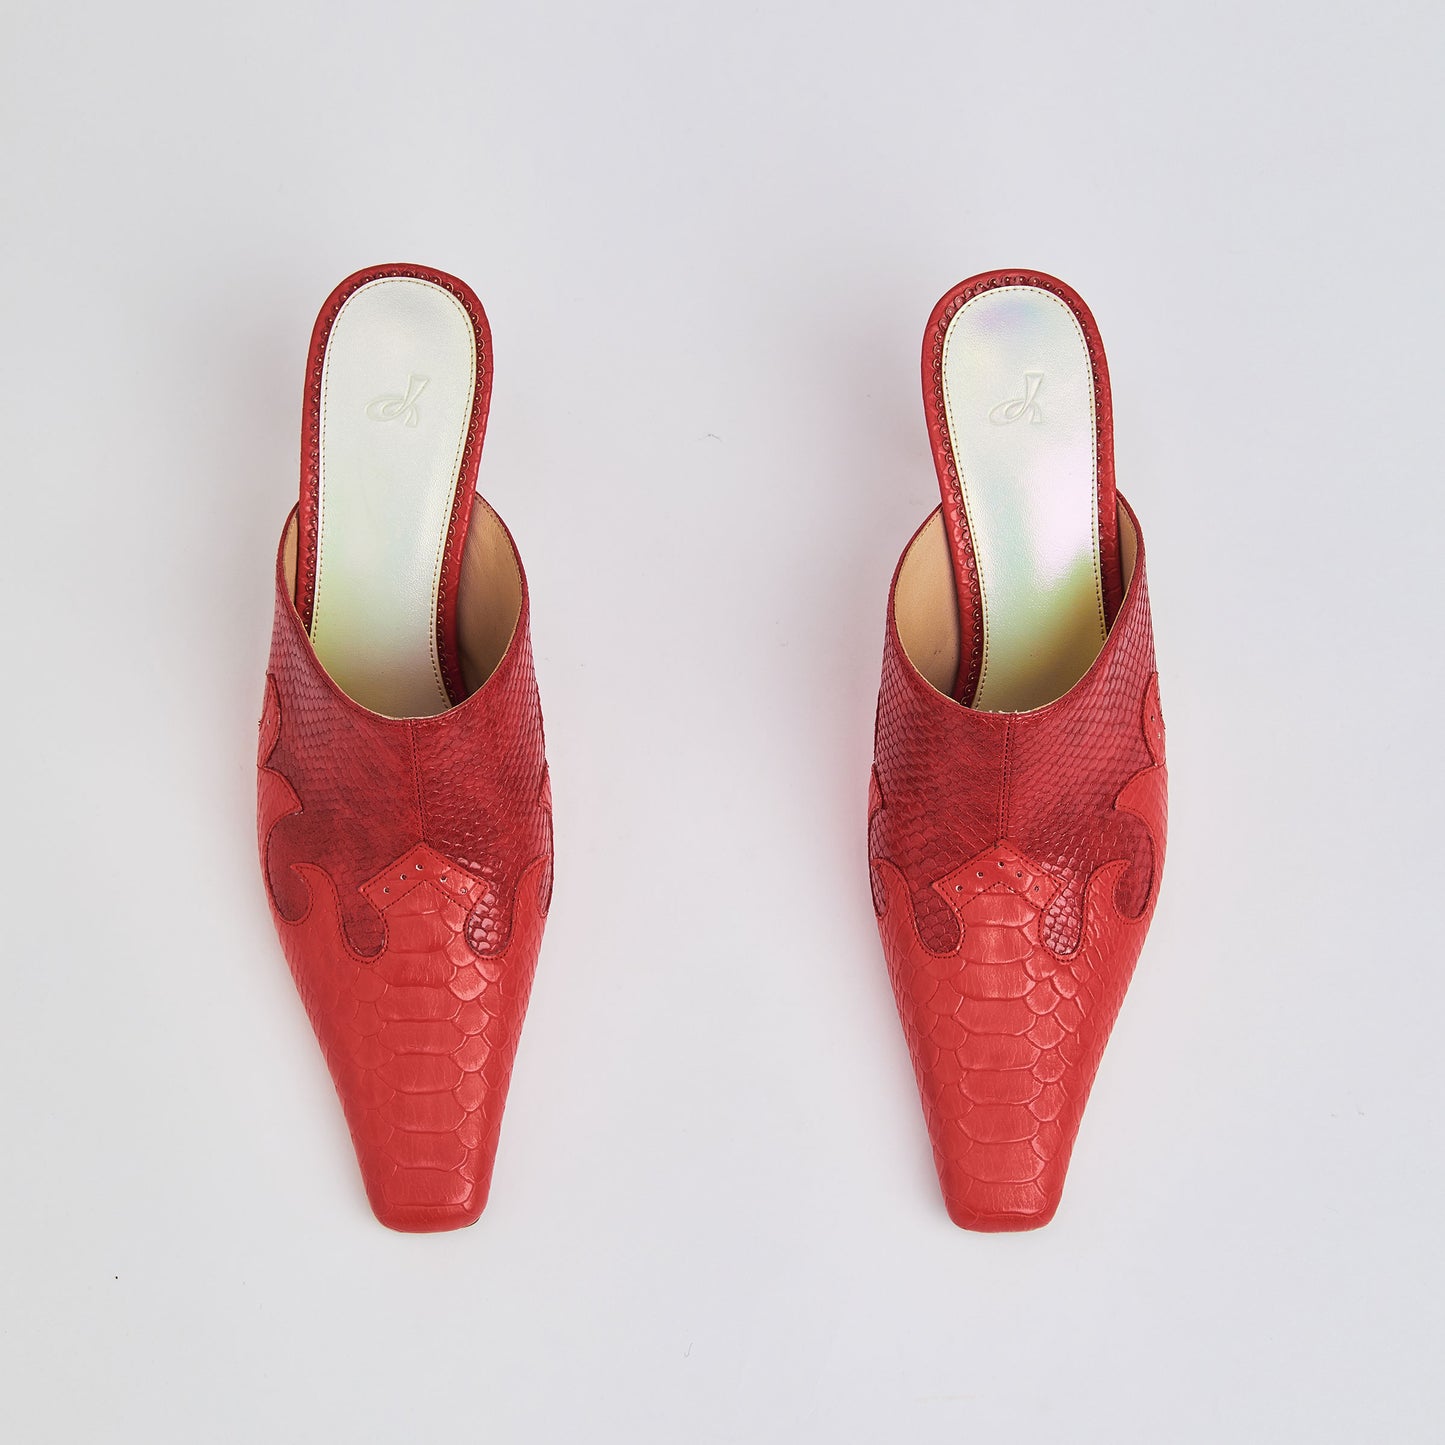 Sirine Patent-leather Mules in Red